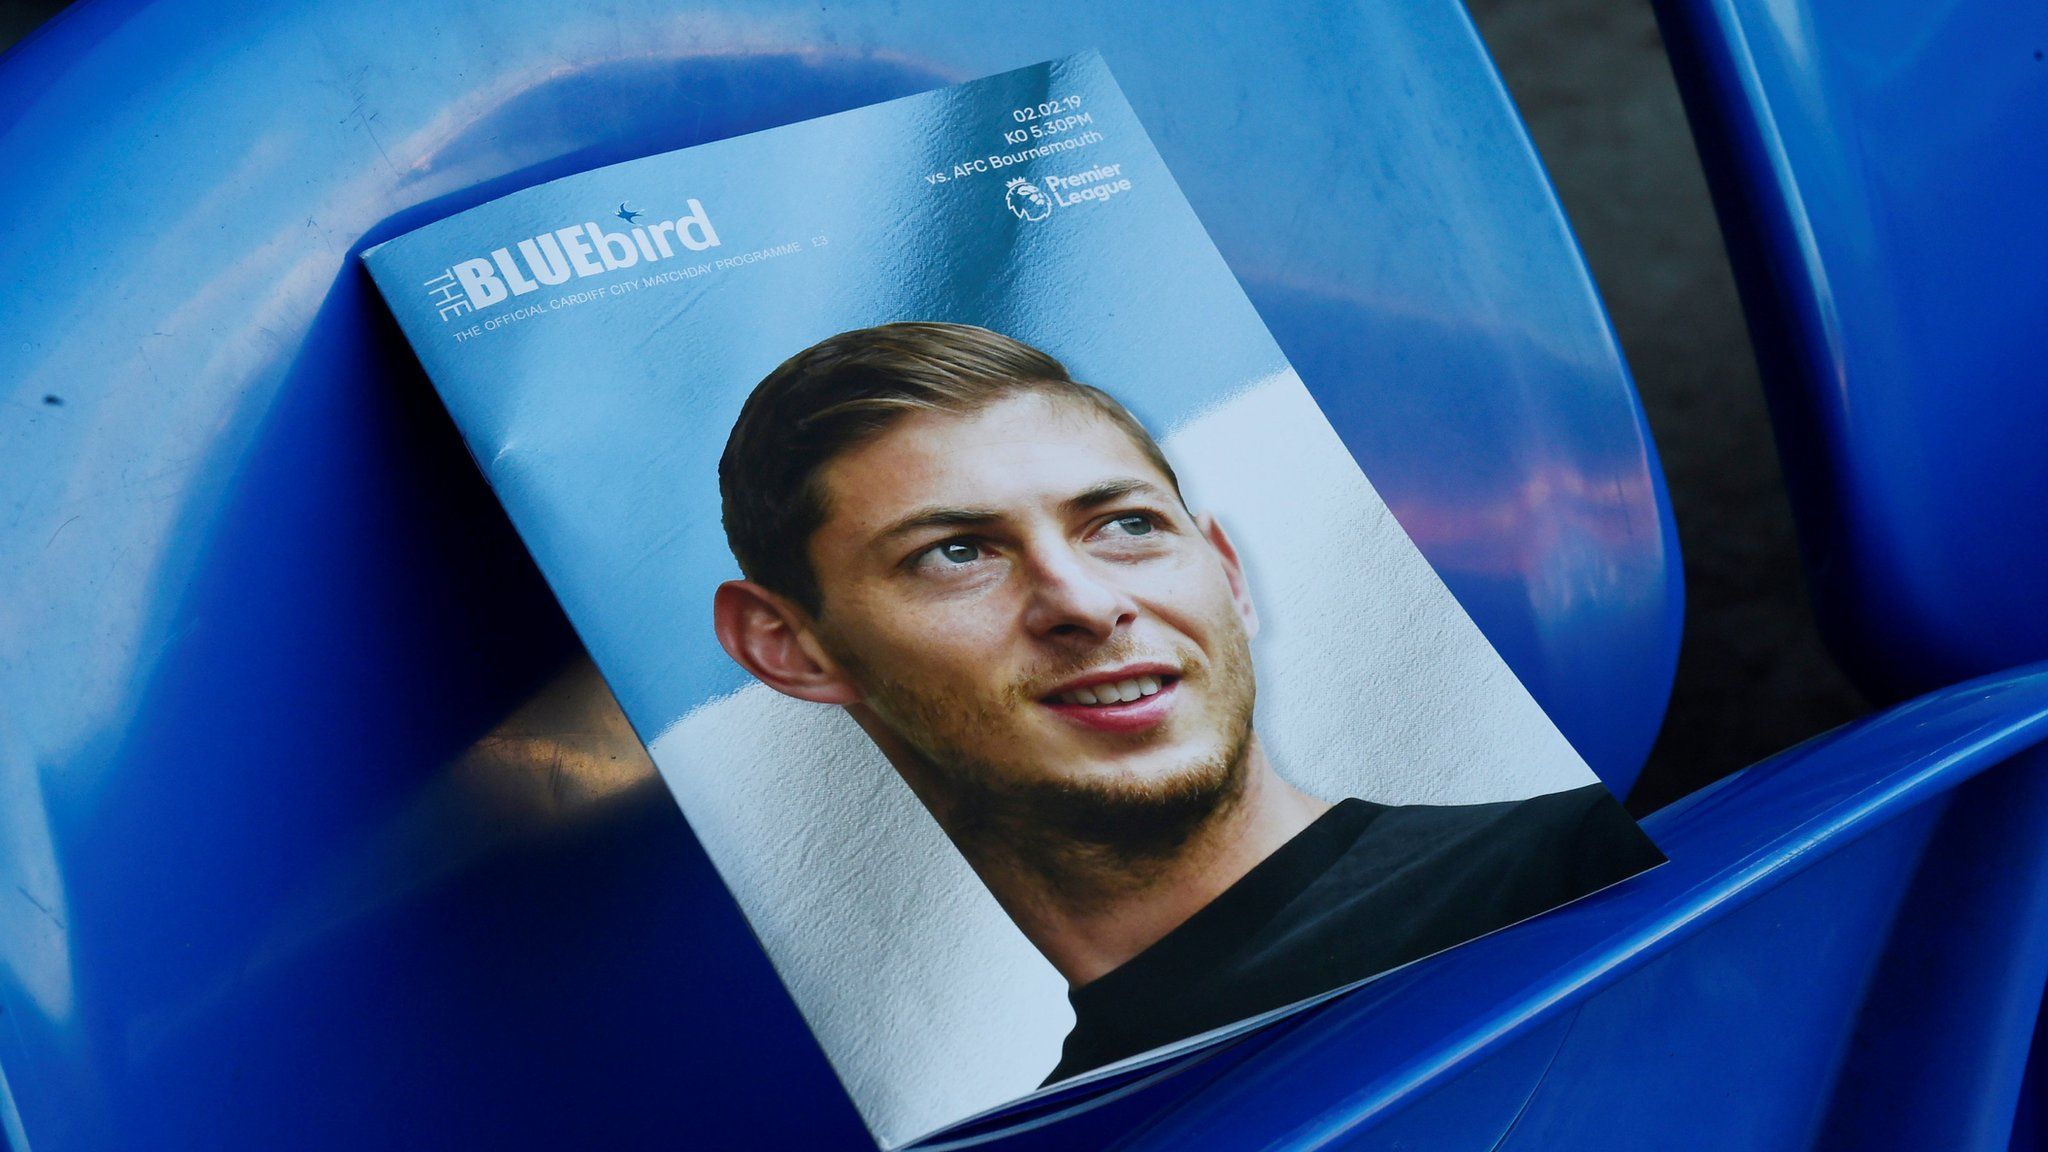 Programme at Cardiff with Emiliano Sala's face on it